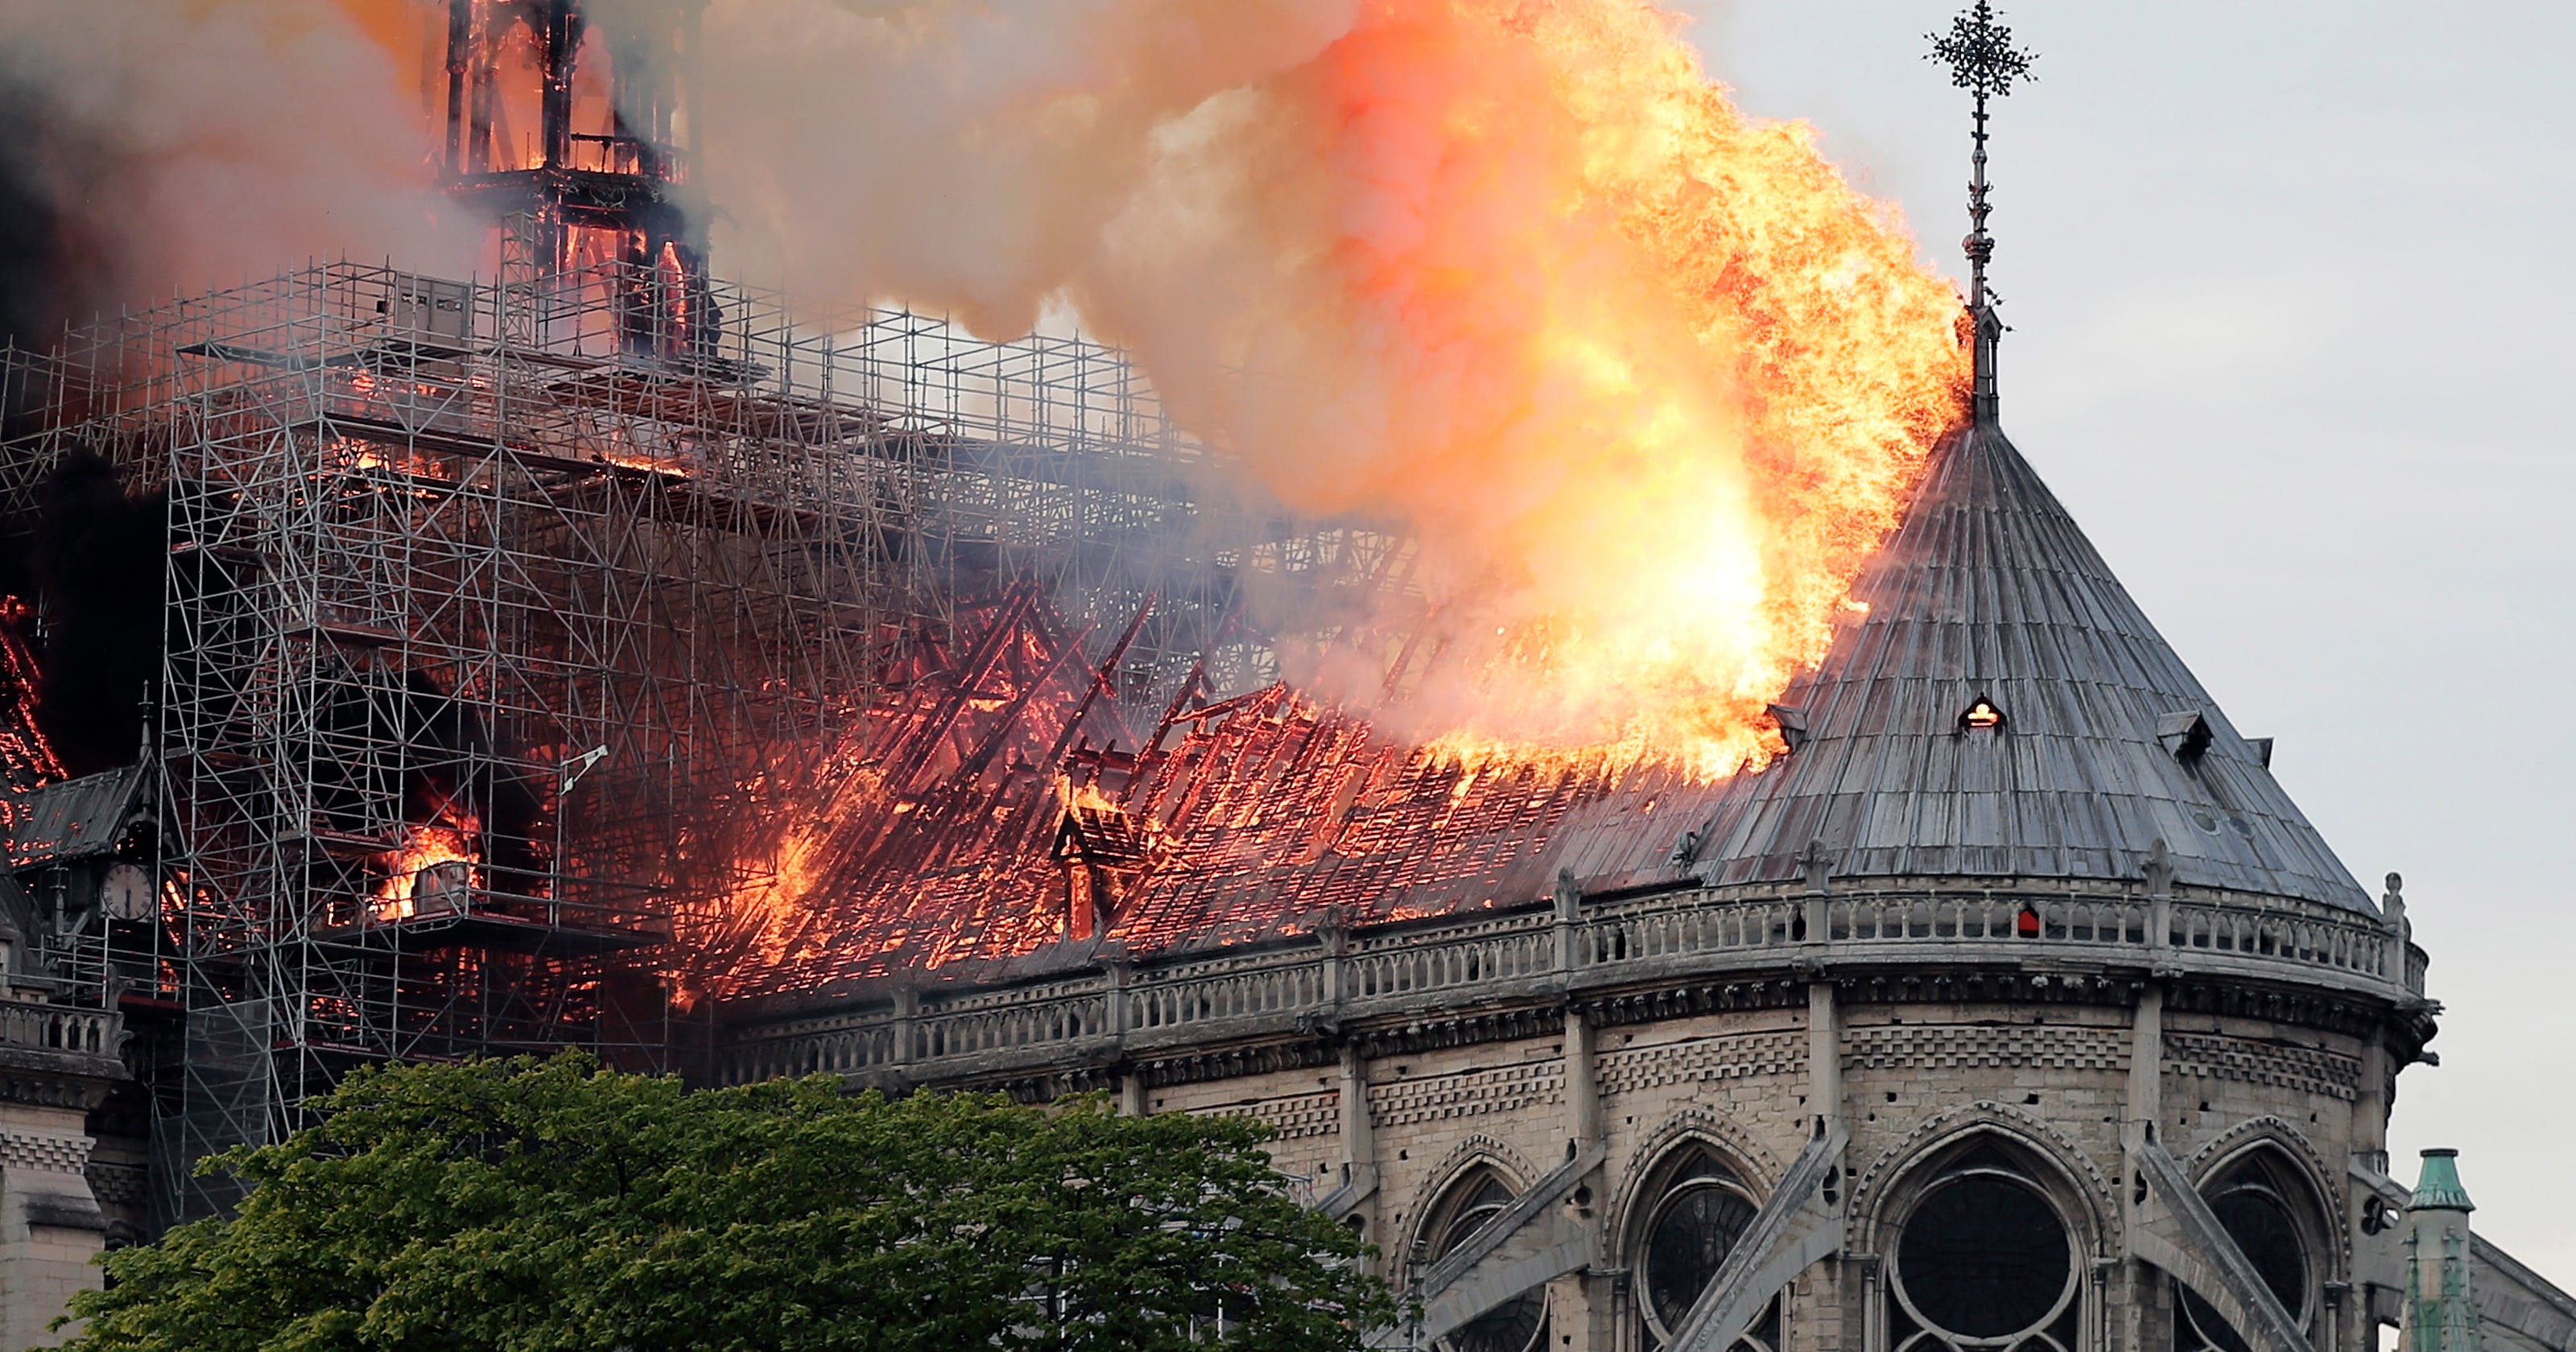 Notre Dame fire: University of Notre Dame donating $100,000